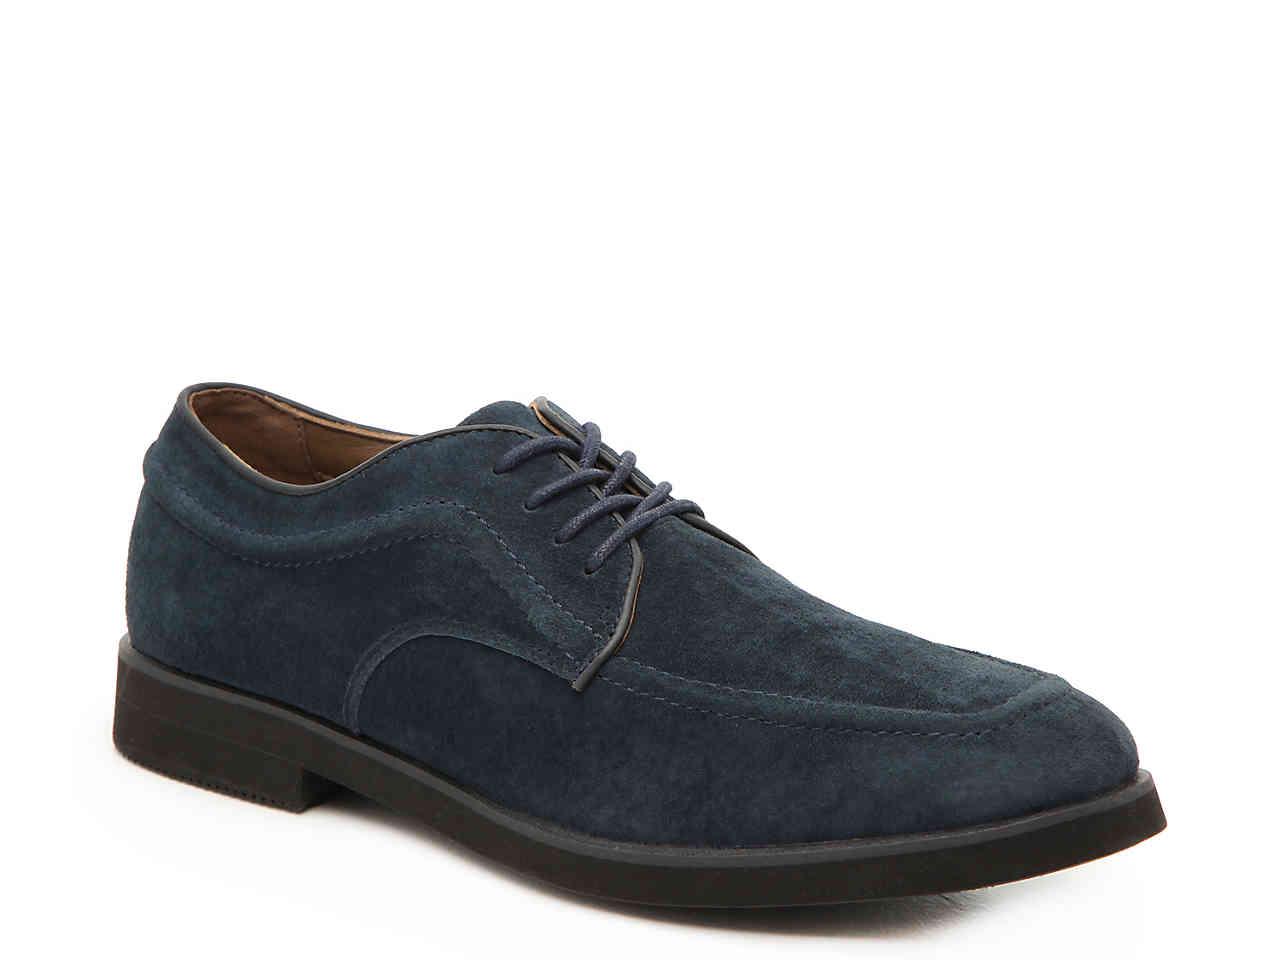 Hush Puppies Bracco Oxford in Navy (Blue) for Men - Lyst